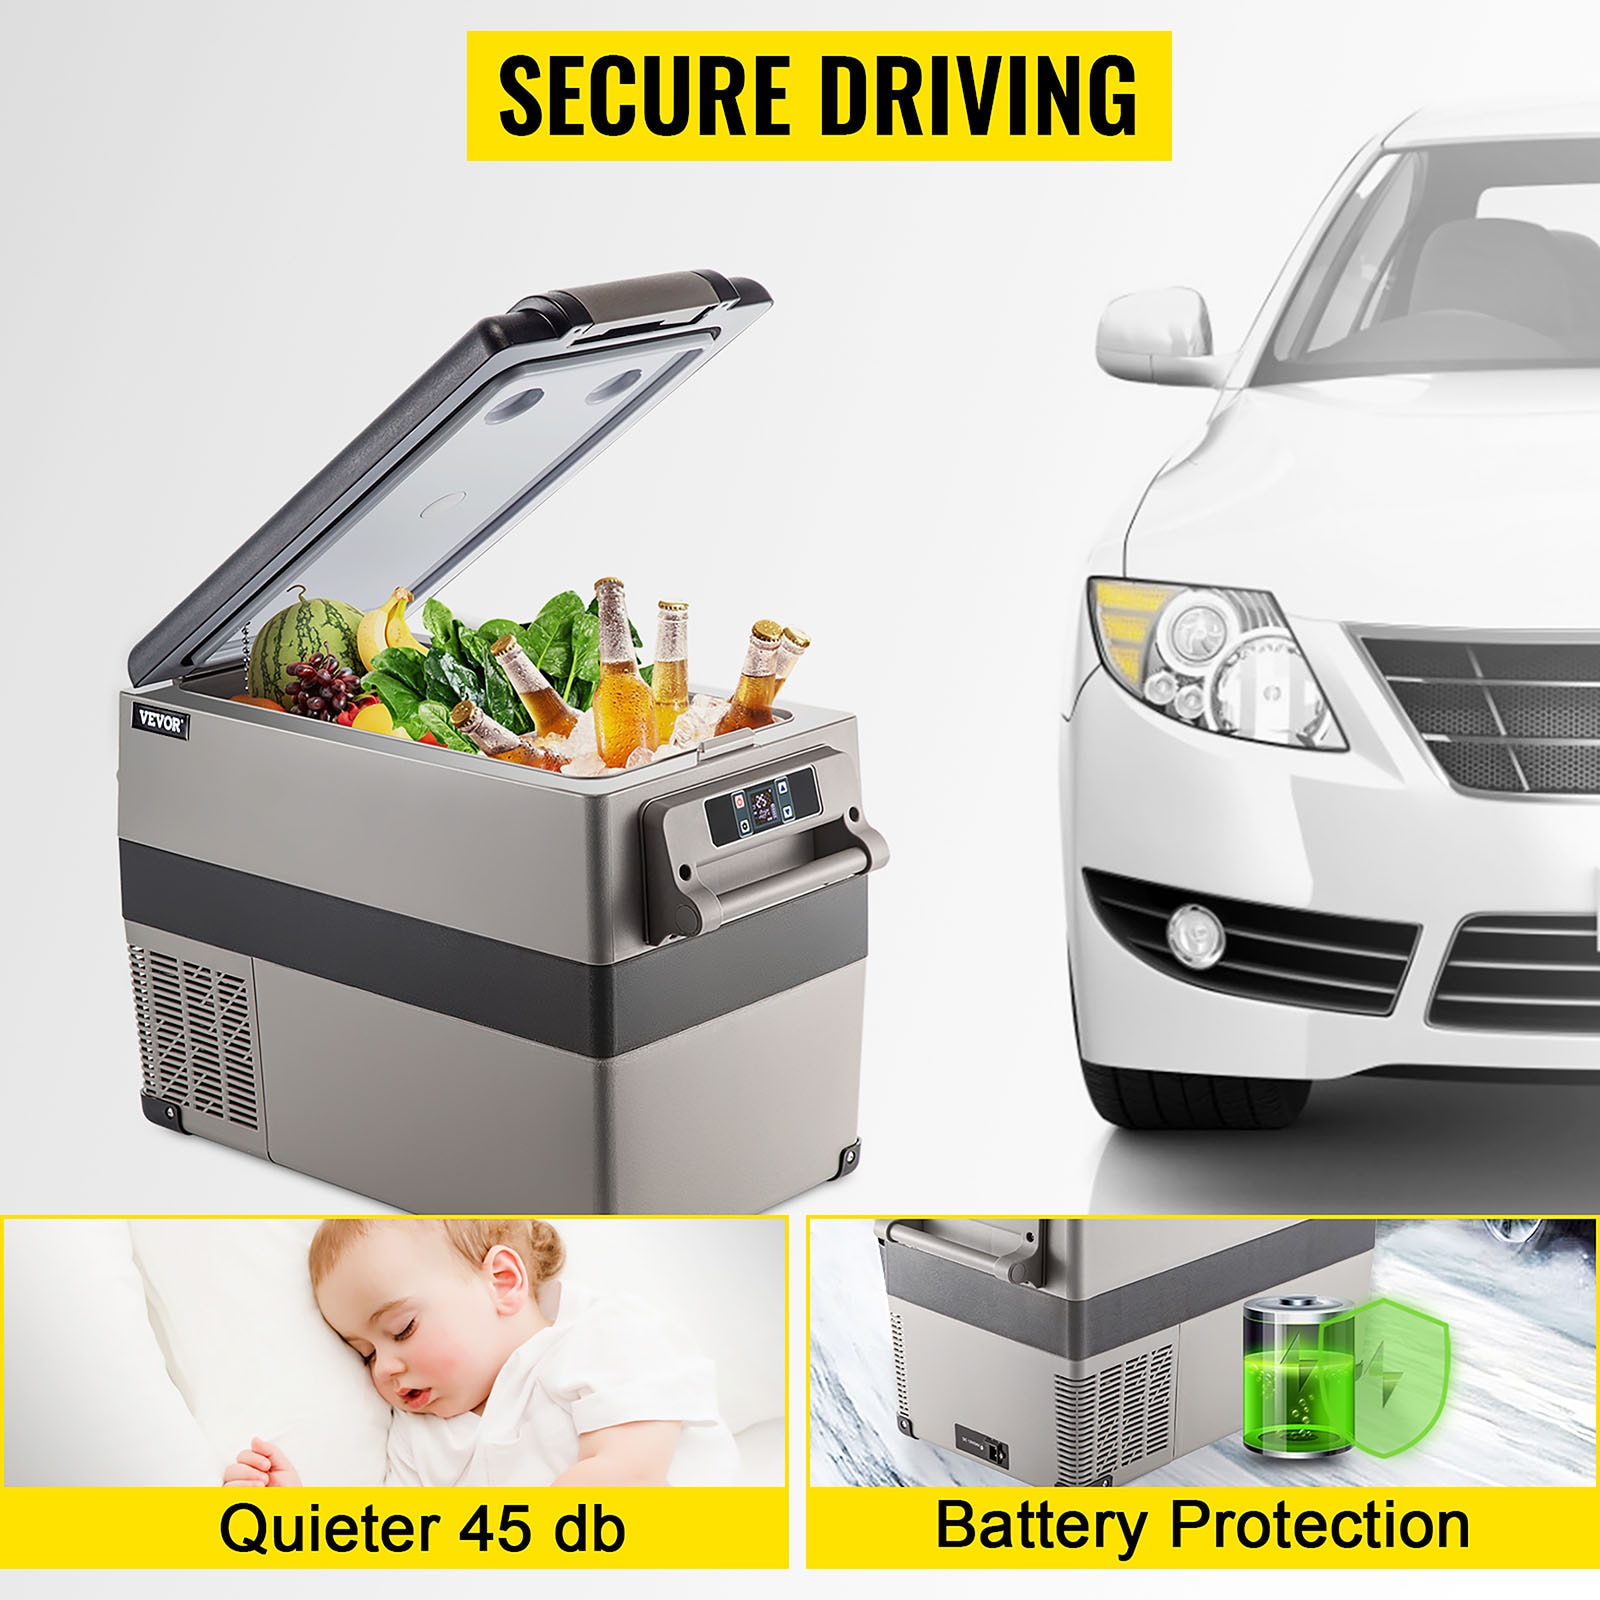 1.59 cu. ft. Outdoor Refrigerator Metal Shell Chest Portable Refrigerator  with App Control for Car Use in Silver